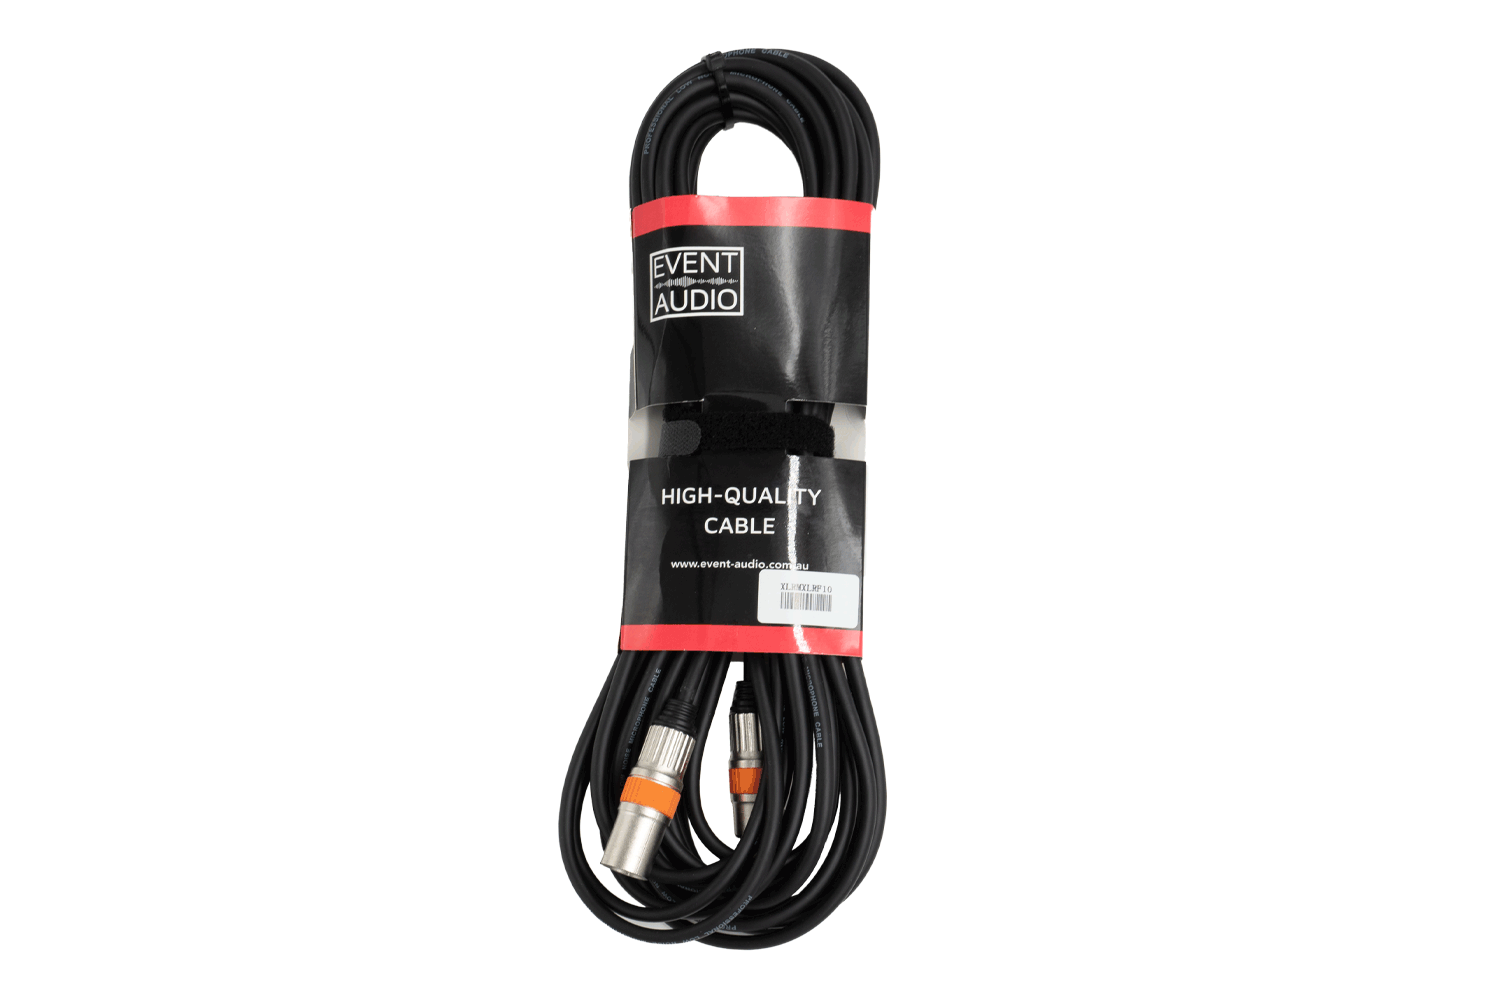 Event Audio XLRMXLRF10 - 10m XLR 3 Pin Male to Female Signal Lead - Orange Ring packaged product 